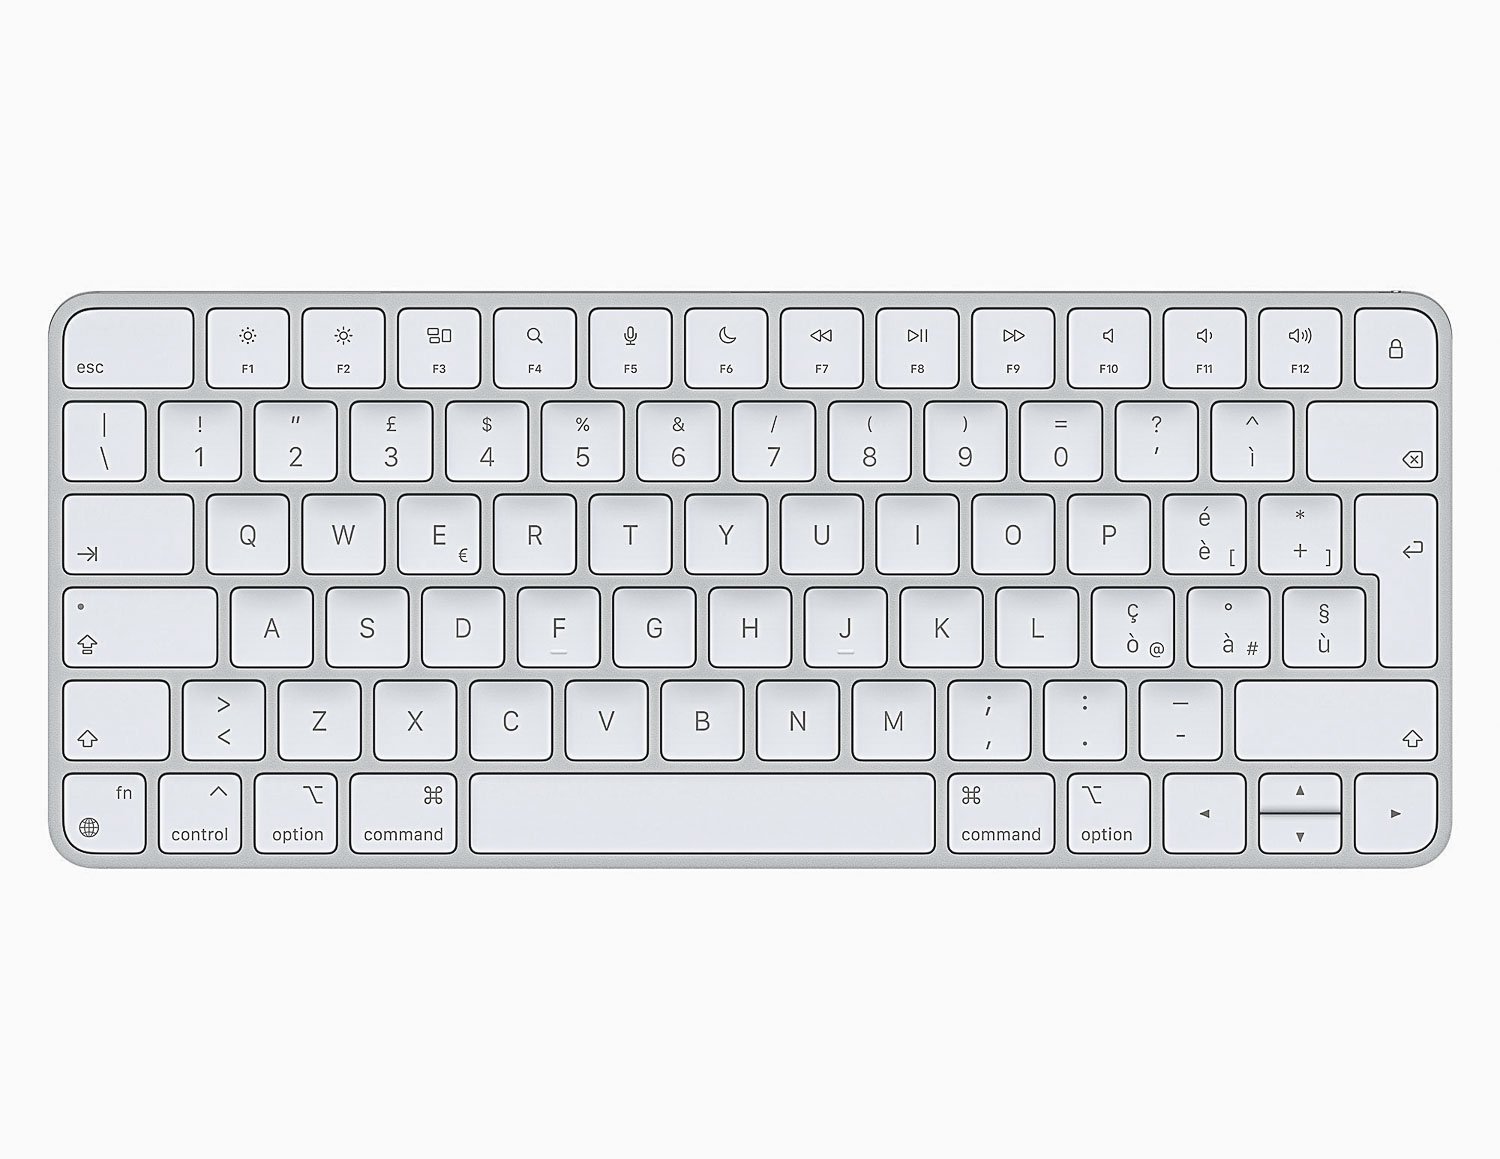 How to change keyboard layout on Mac